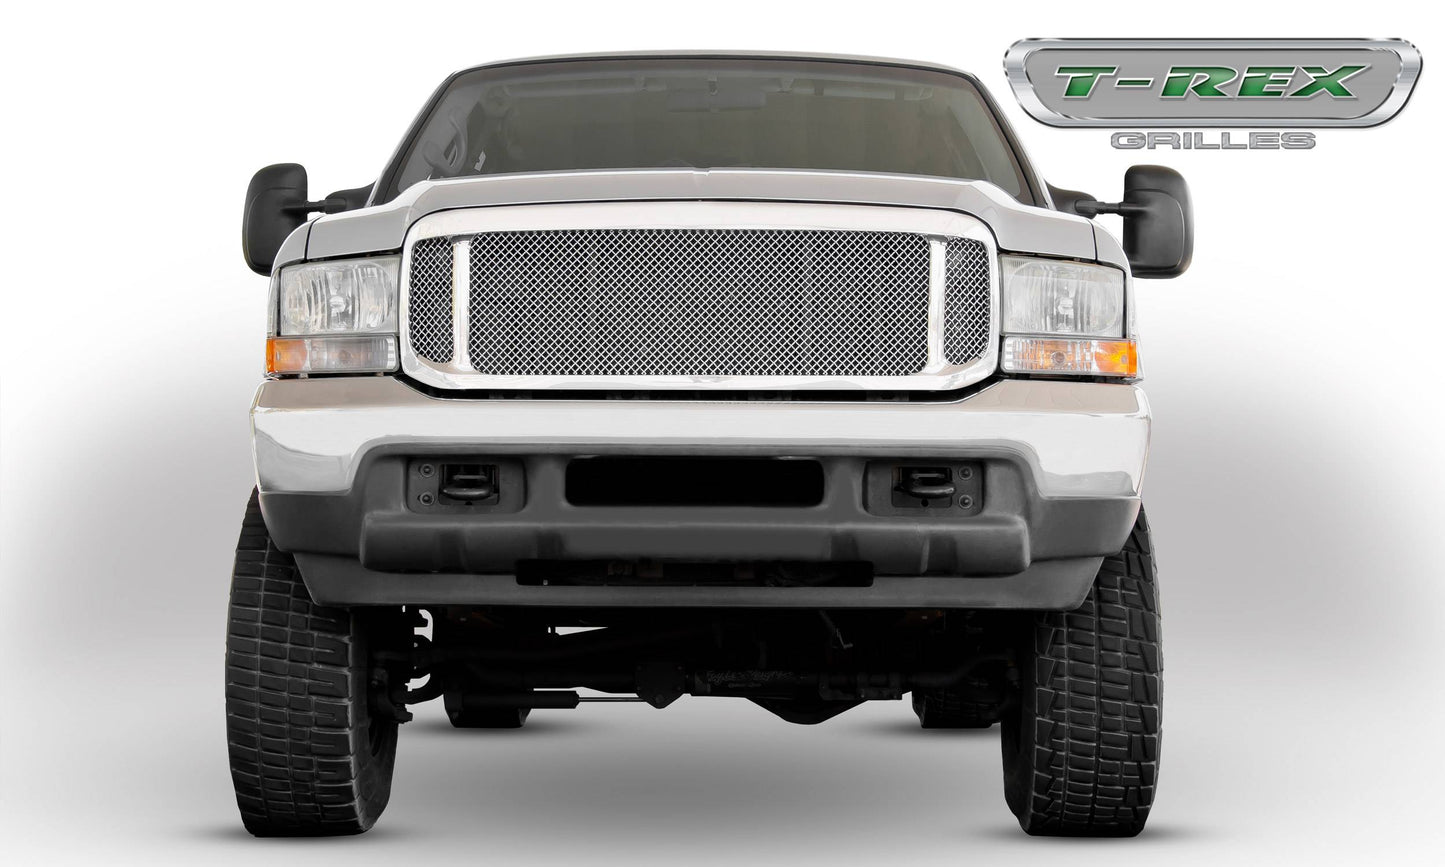 T-REX Grilles 50571 Polished Stainless Steel Small Mesh Grille Fits 2000-2004 Ford Excursion Harley Davidson